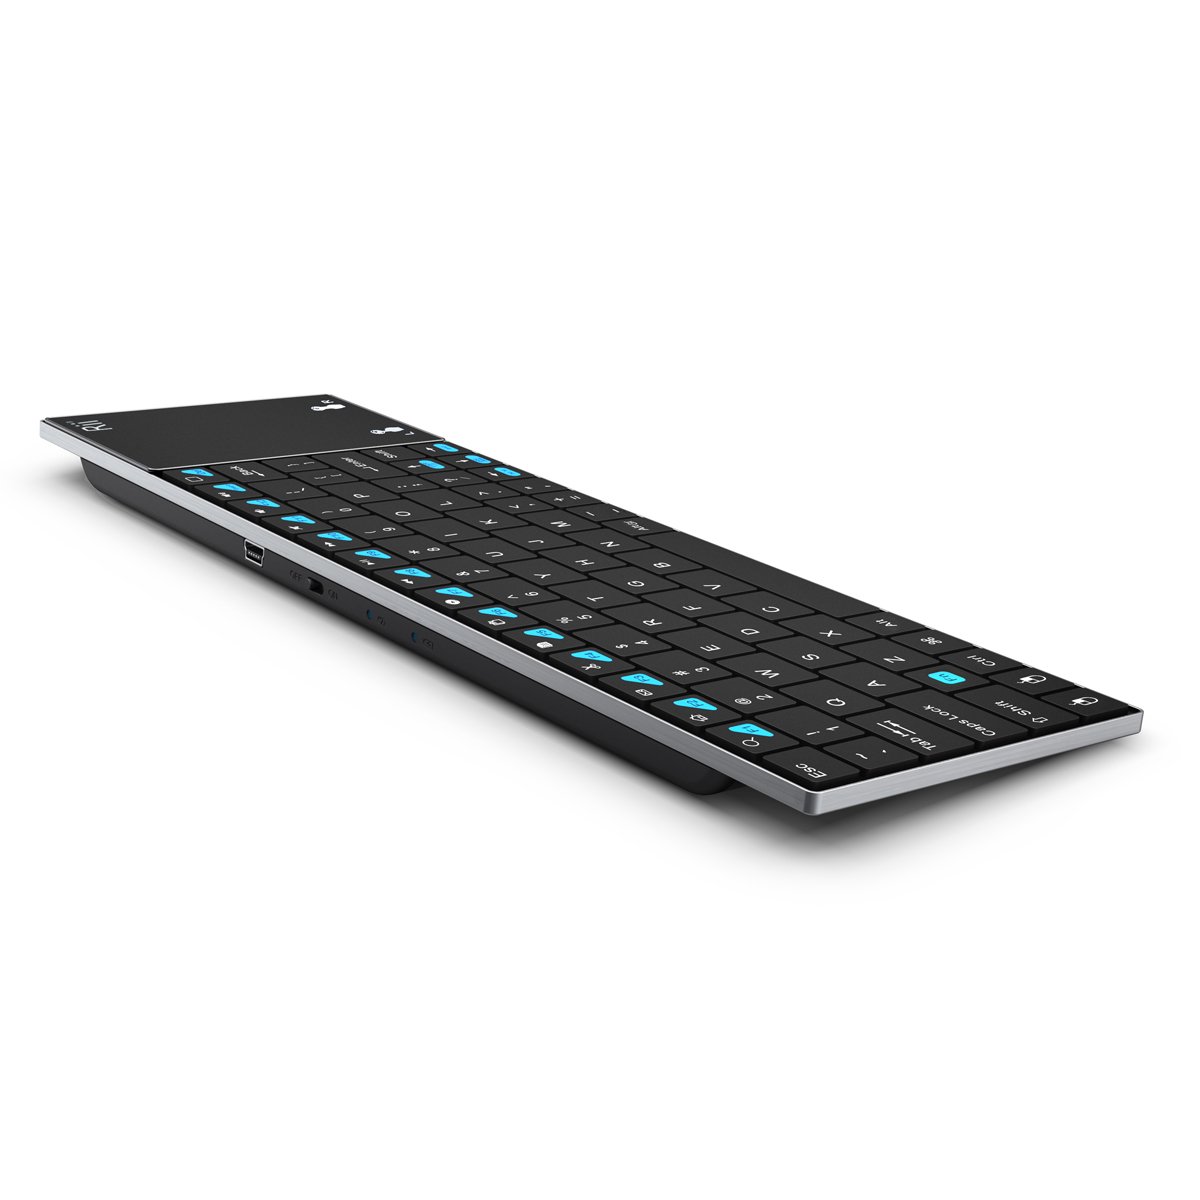 Rii Mini K12 Ultra Slim Wireless Keyboard with Touchpad for Travel Media Player Game Console (Mini k12)